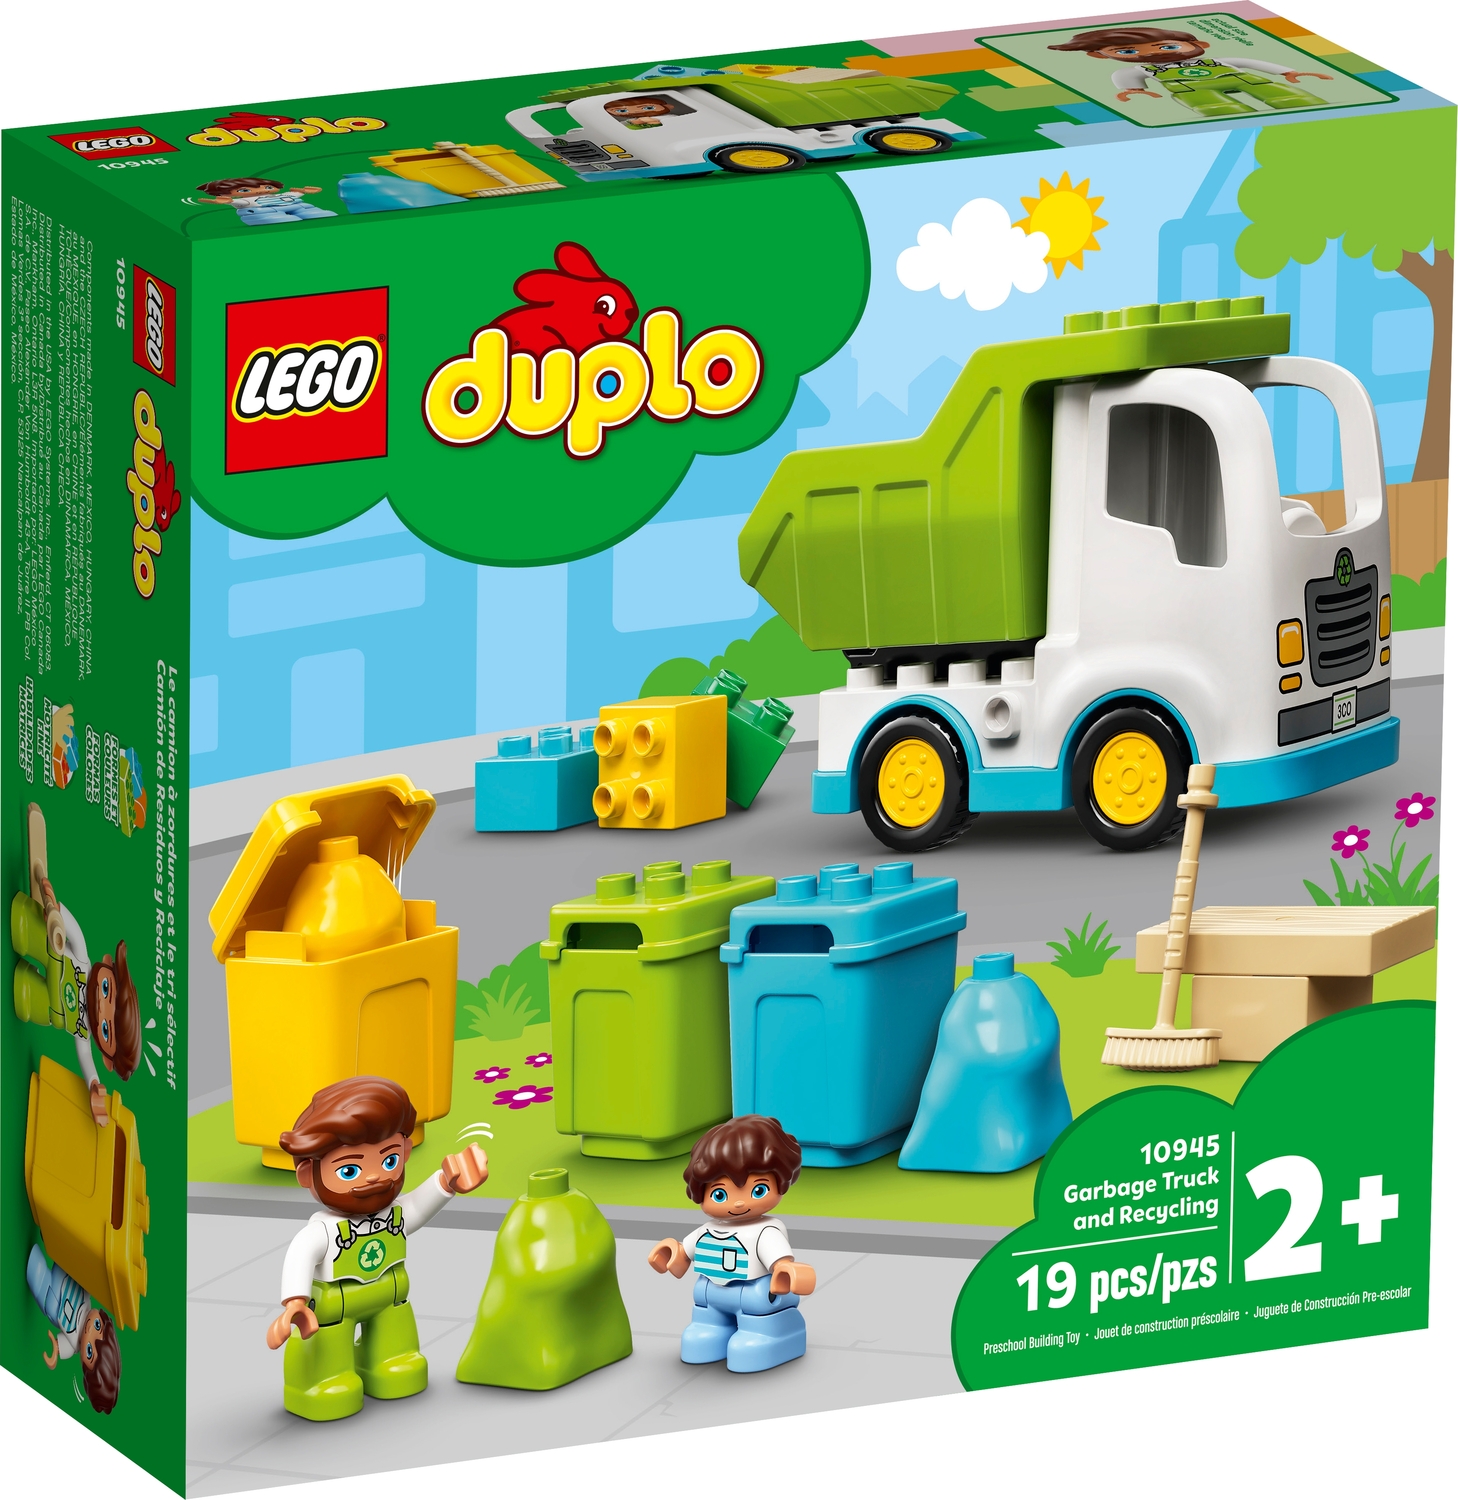 Lego Duplo 10945 Garbage Truck and Recycling - Teaching Toys and Books